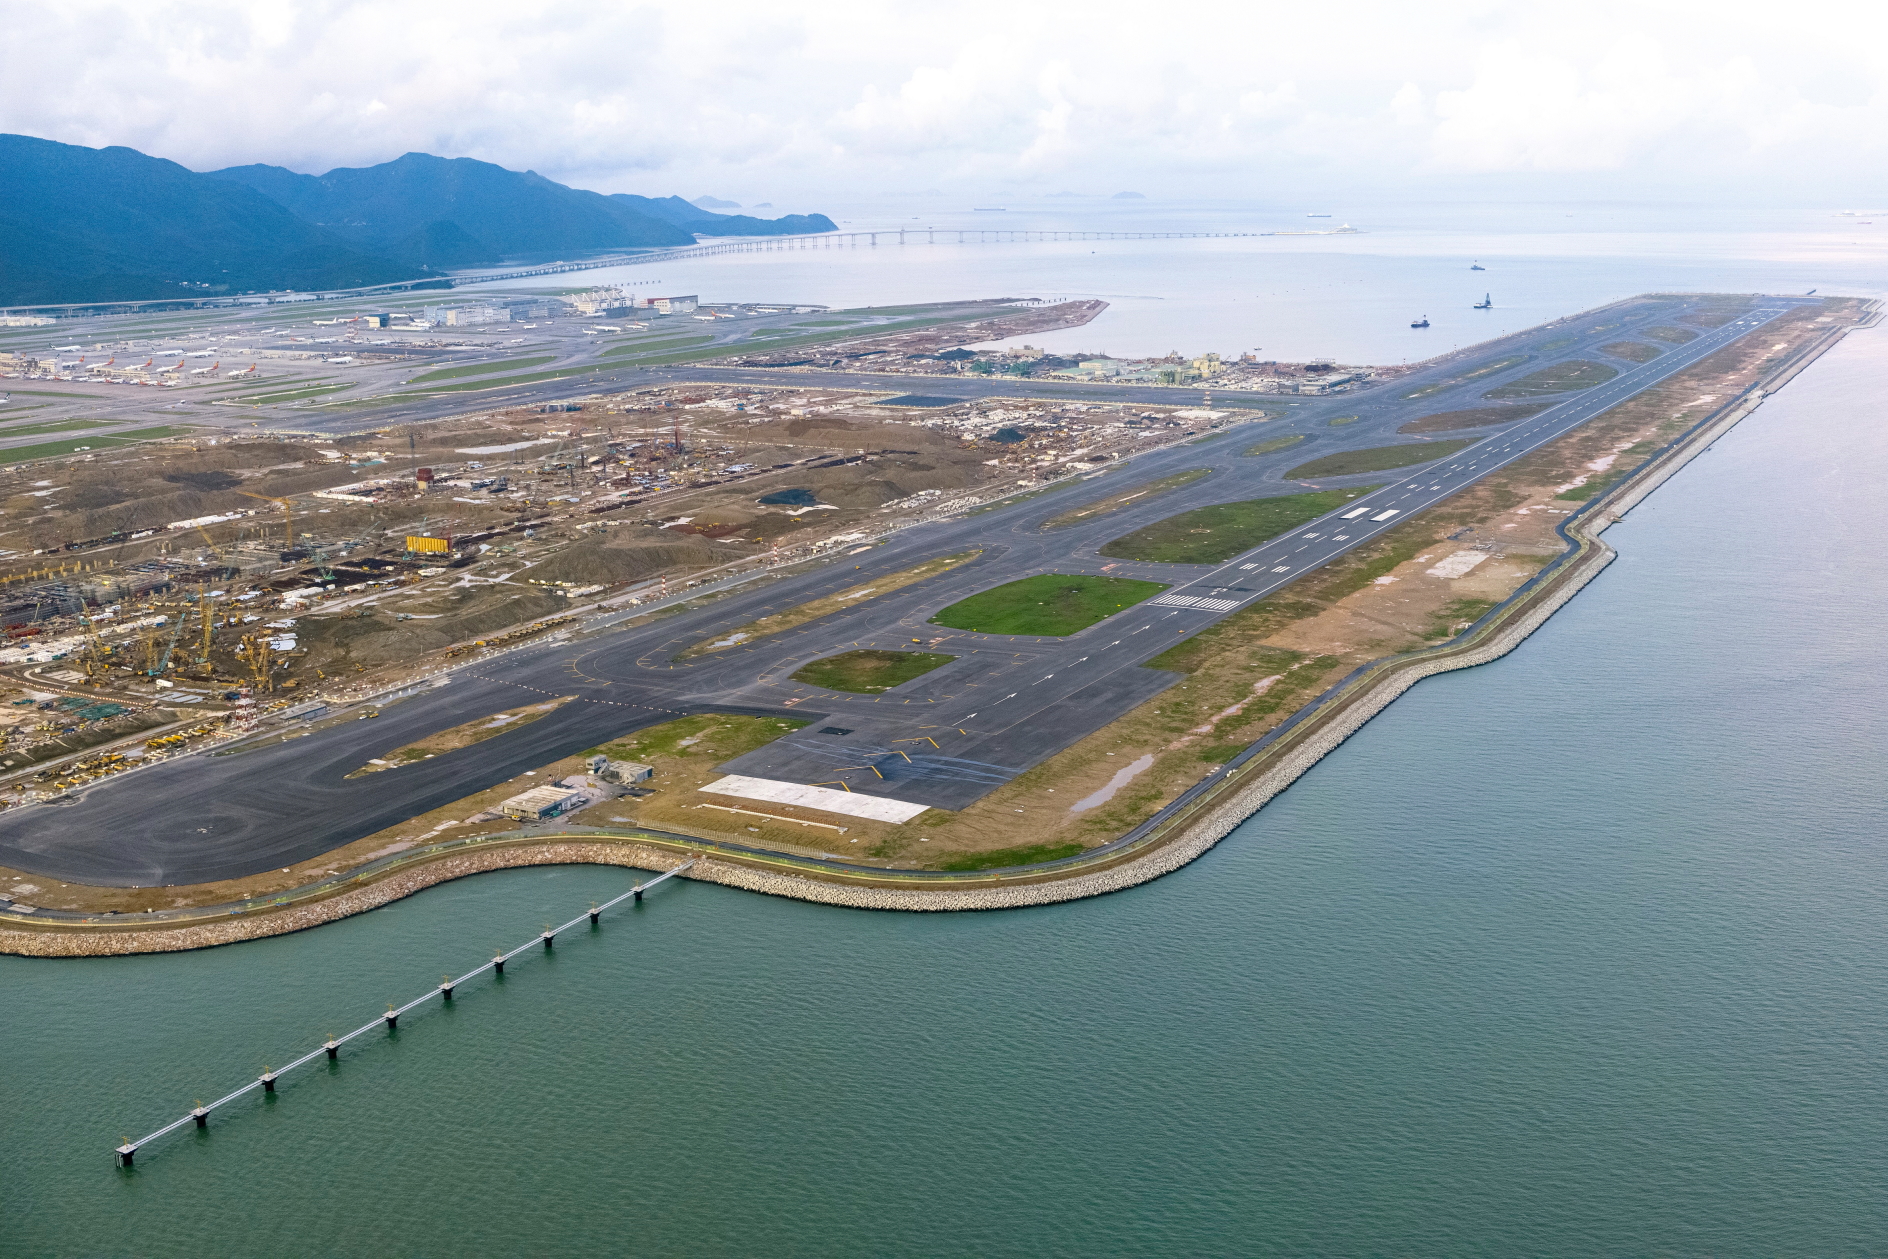 HKIA closes Centre Runway as new Third Runway opens for familiarisation. Click to enlarge.